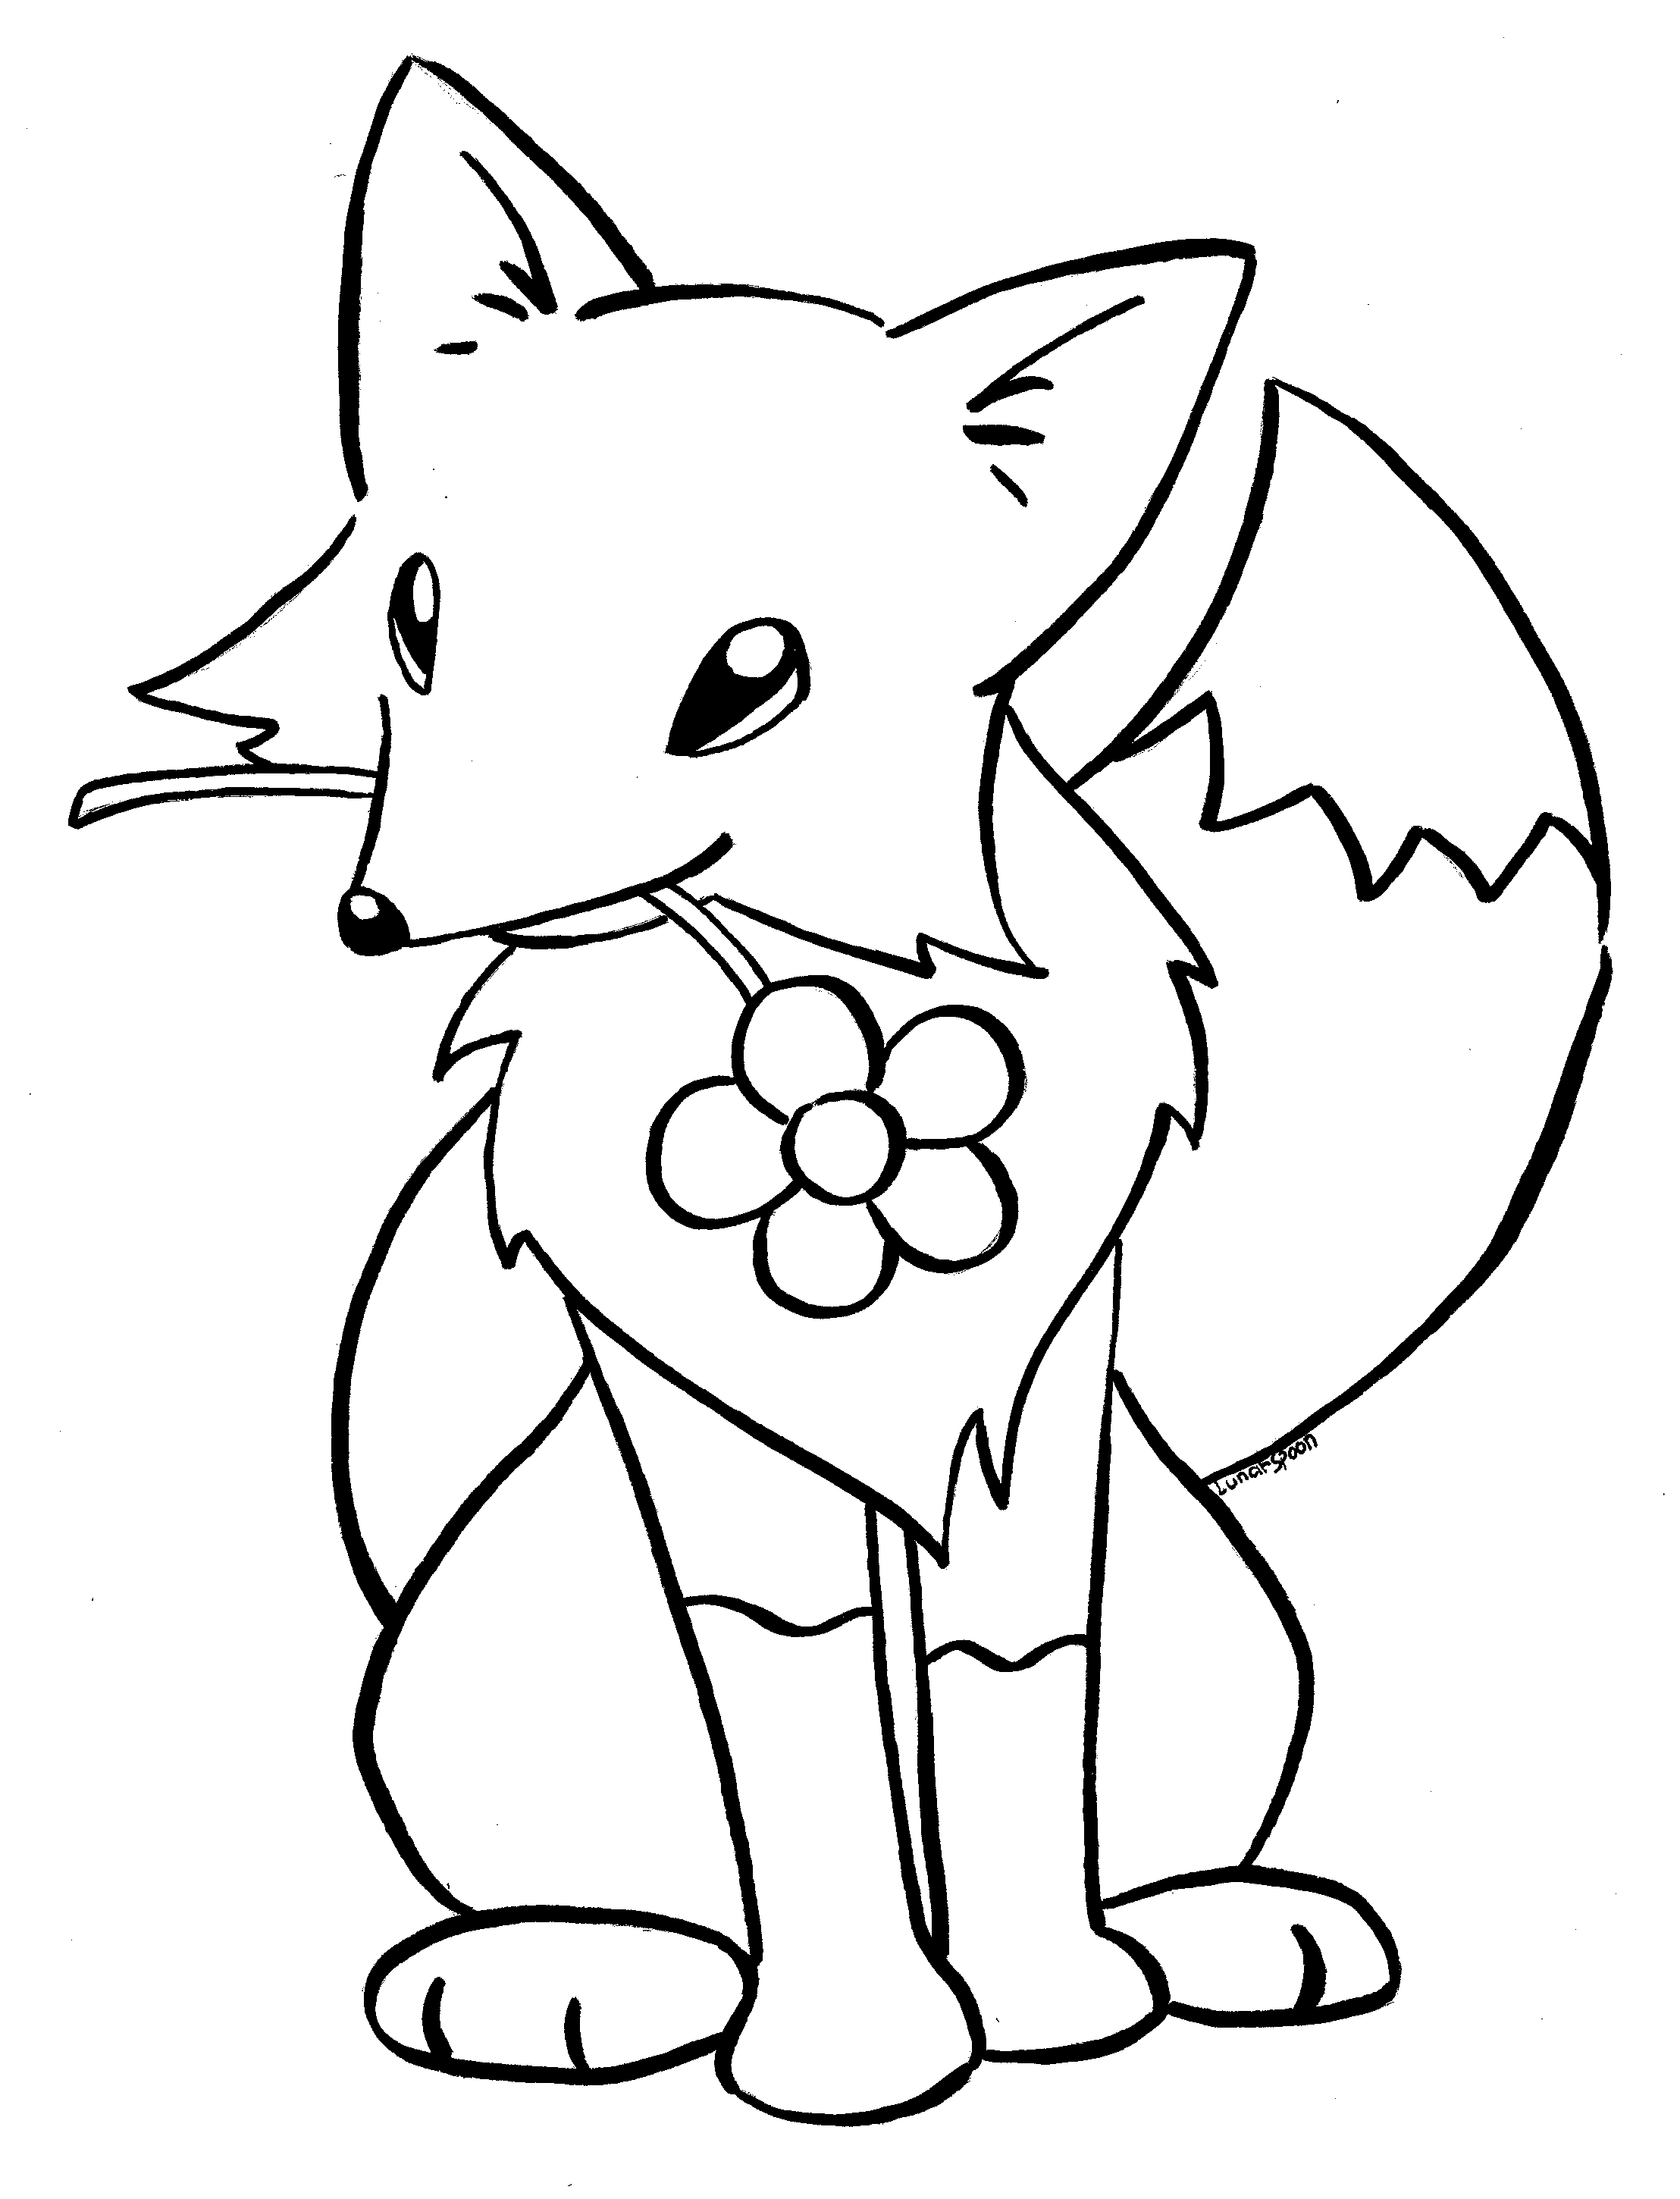 Christmas Fox Coloring Pages - Coloring Pages For All Ages - Coloring Home